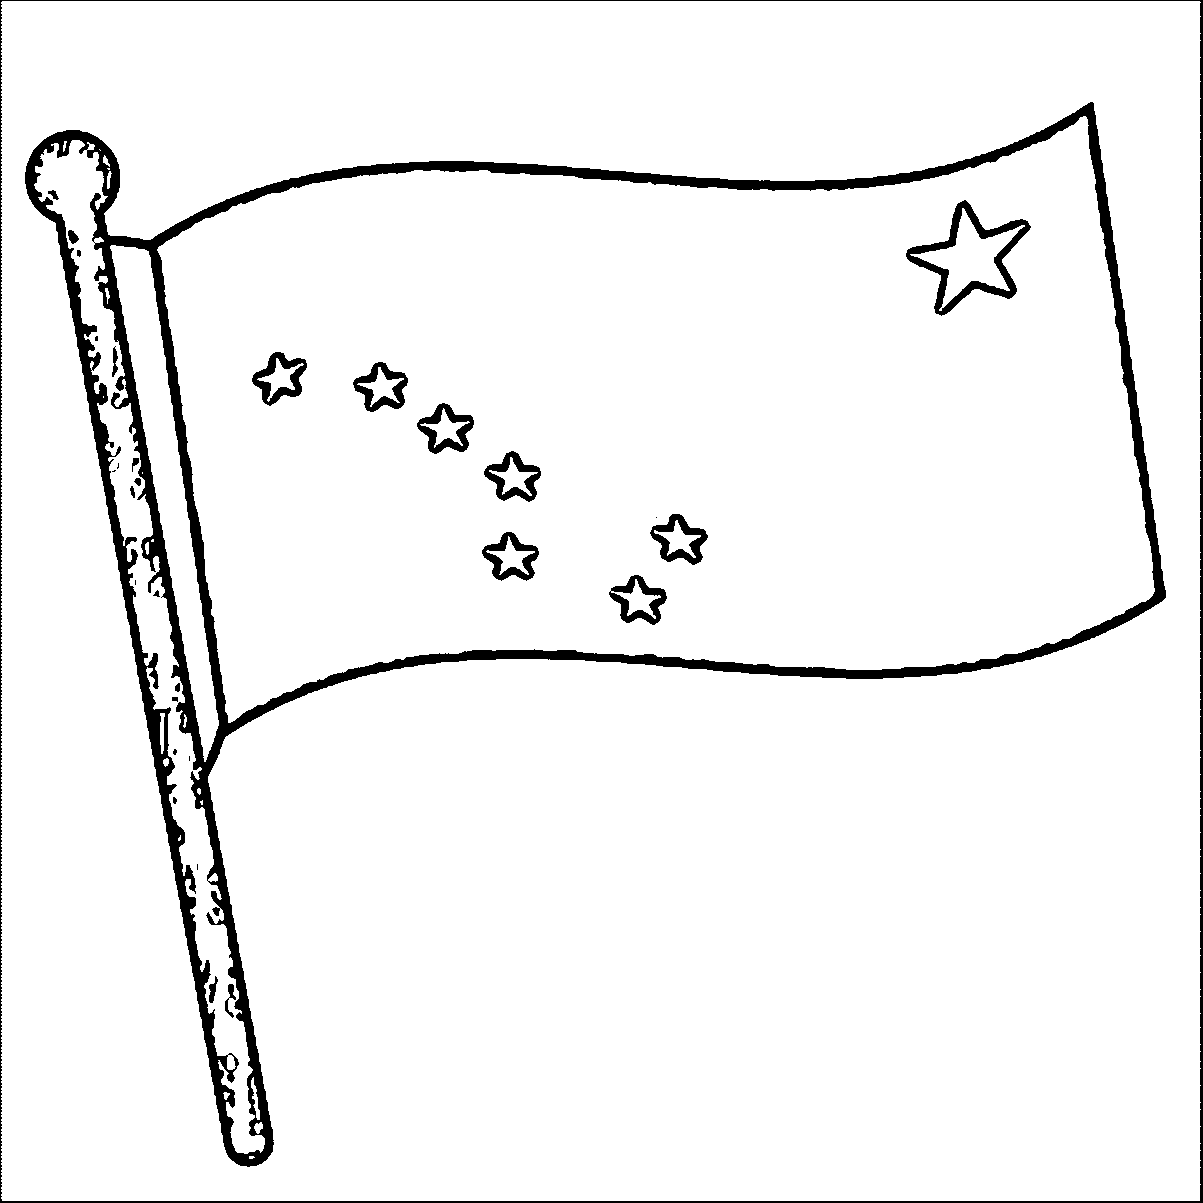 alaska flag coloring page alaska flag coloring page a free travel coloring printable flag alaska coloring page 